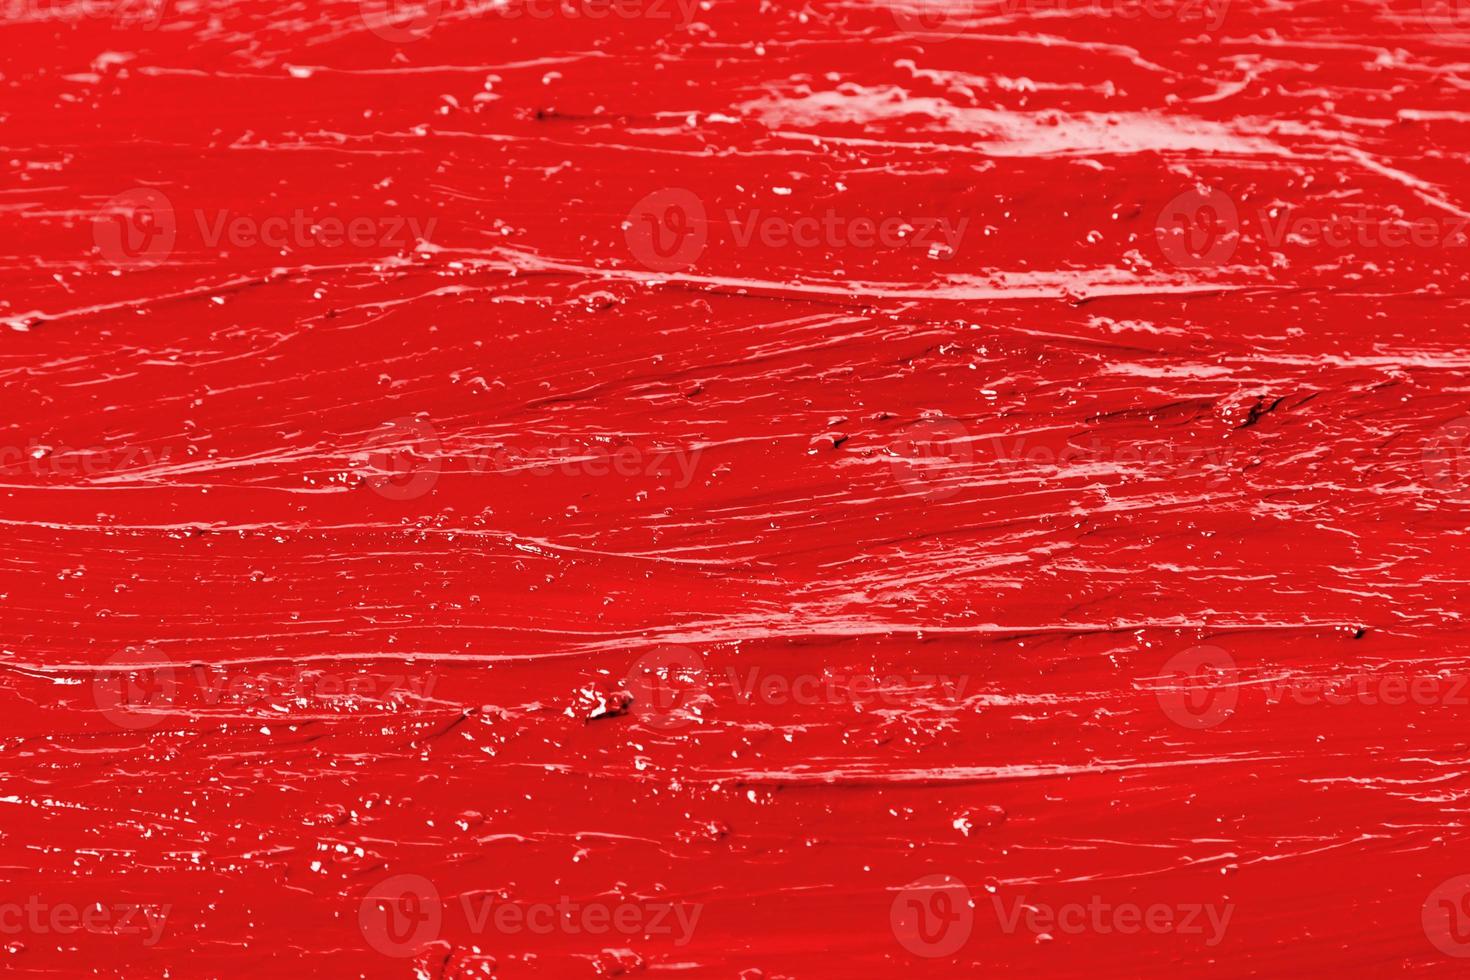 Background of a smudged red lipstick texture photo